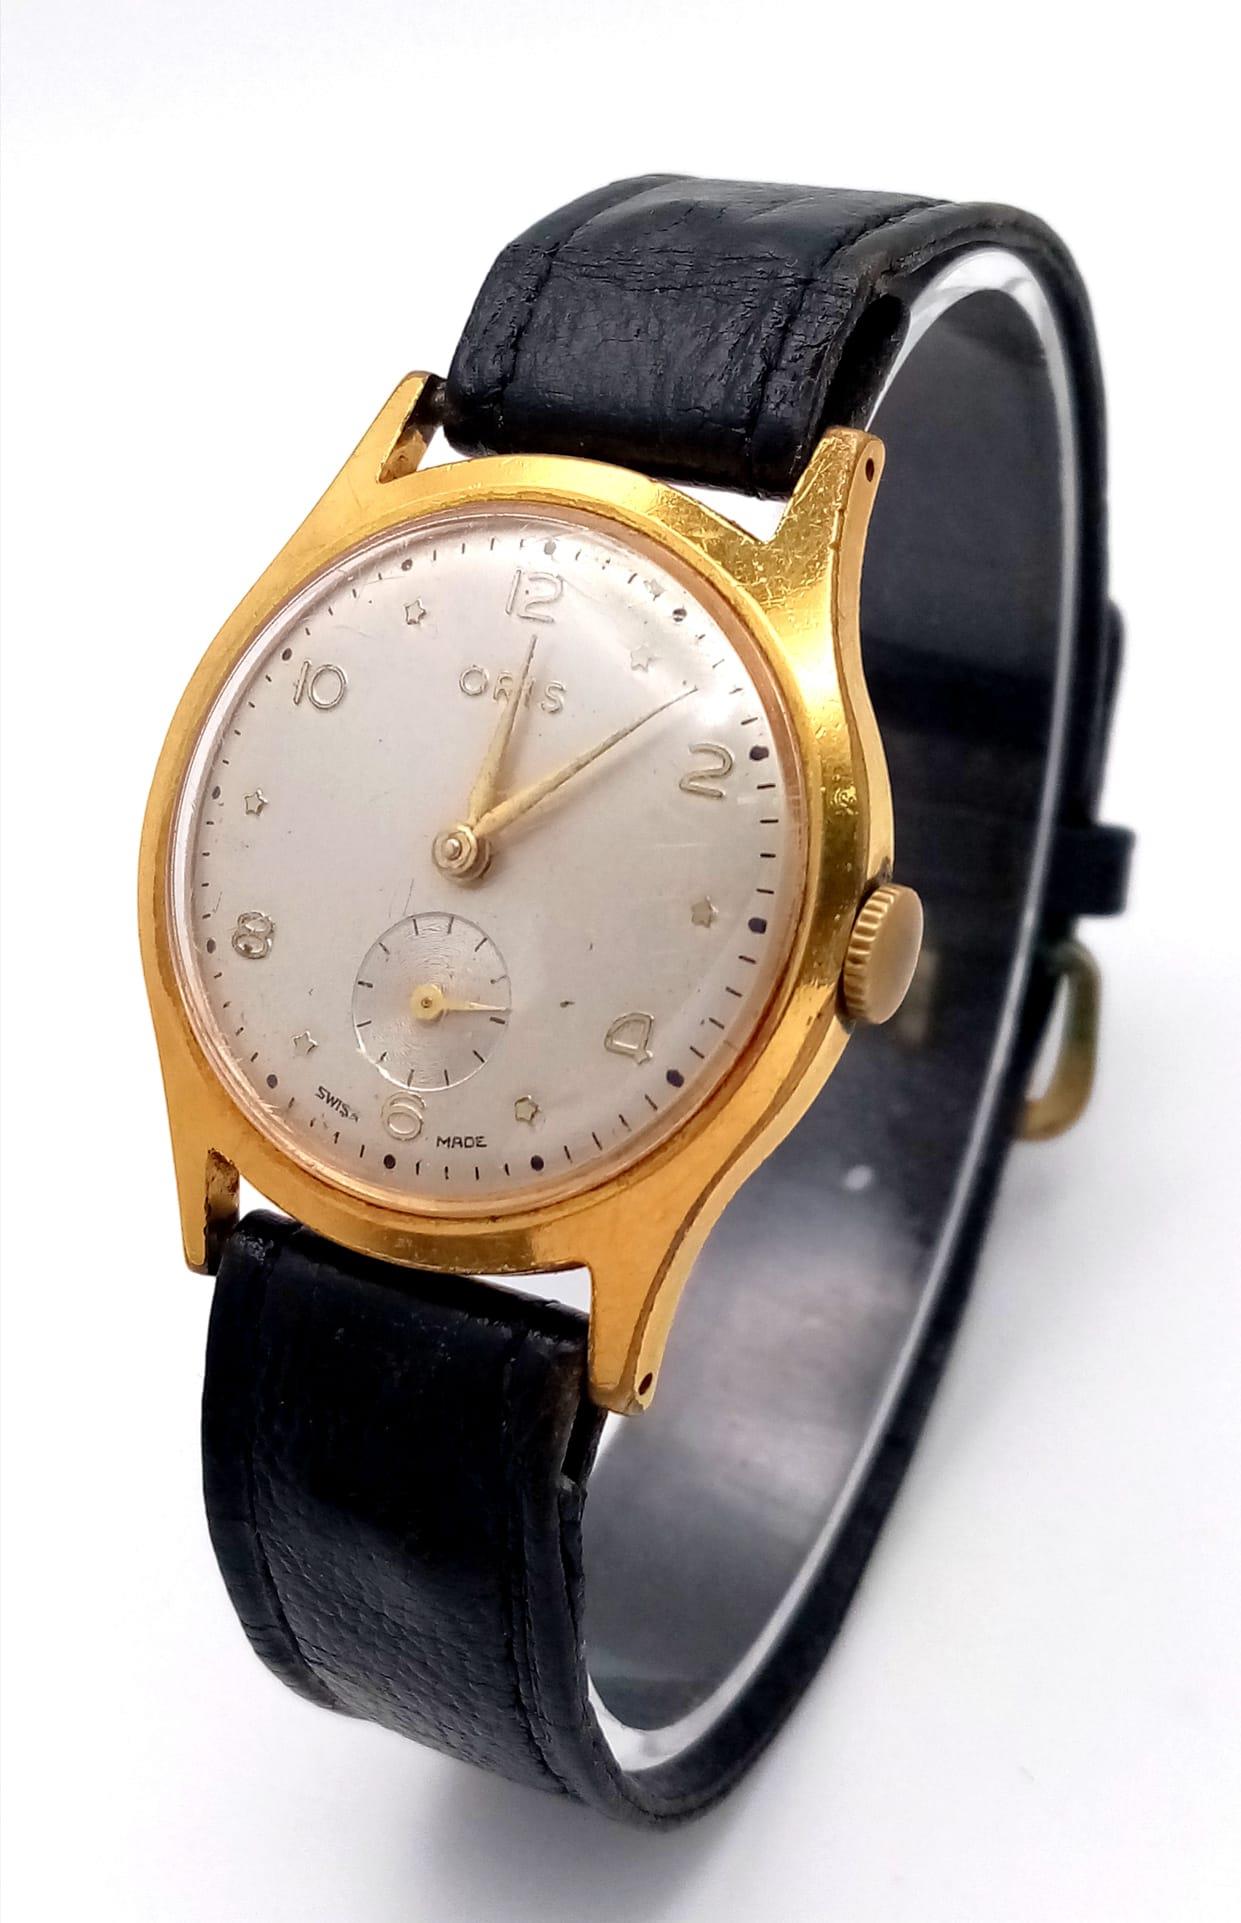 A Vintage Oris Mechanical Gents Watch. Black leather strap. Two tone case - 33mm. Silver tone dial